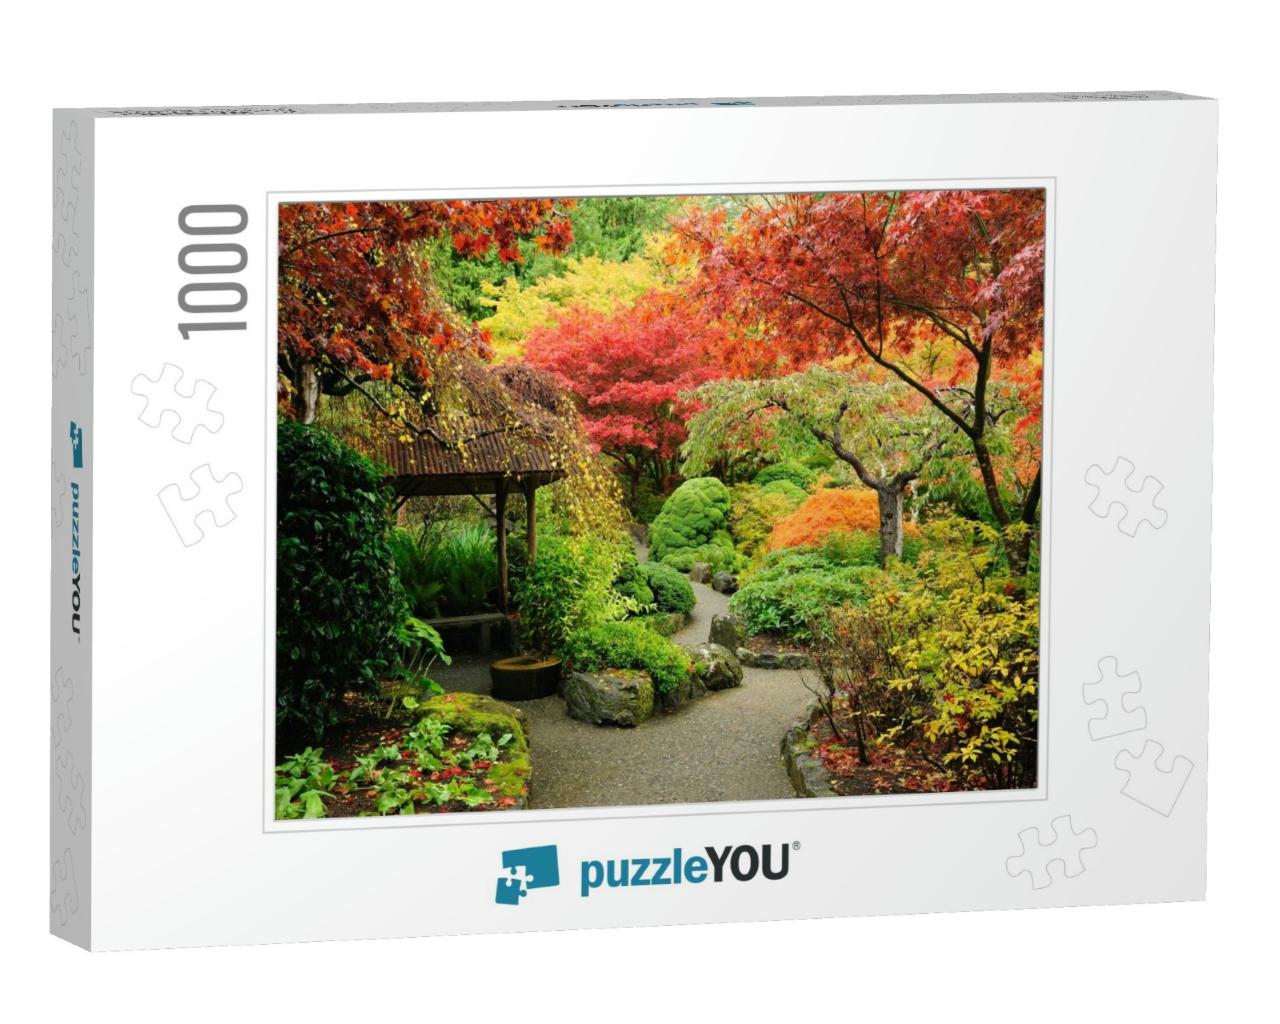 Autumnal Japanese Garden in Victoria, Vancouver Island, B... Jigsaw Puzzle with 1000 pieces